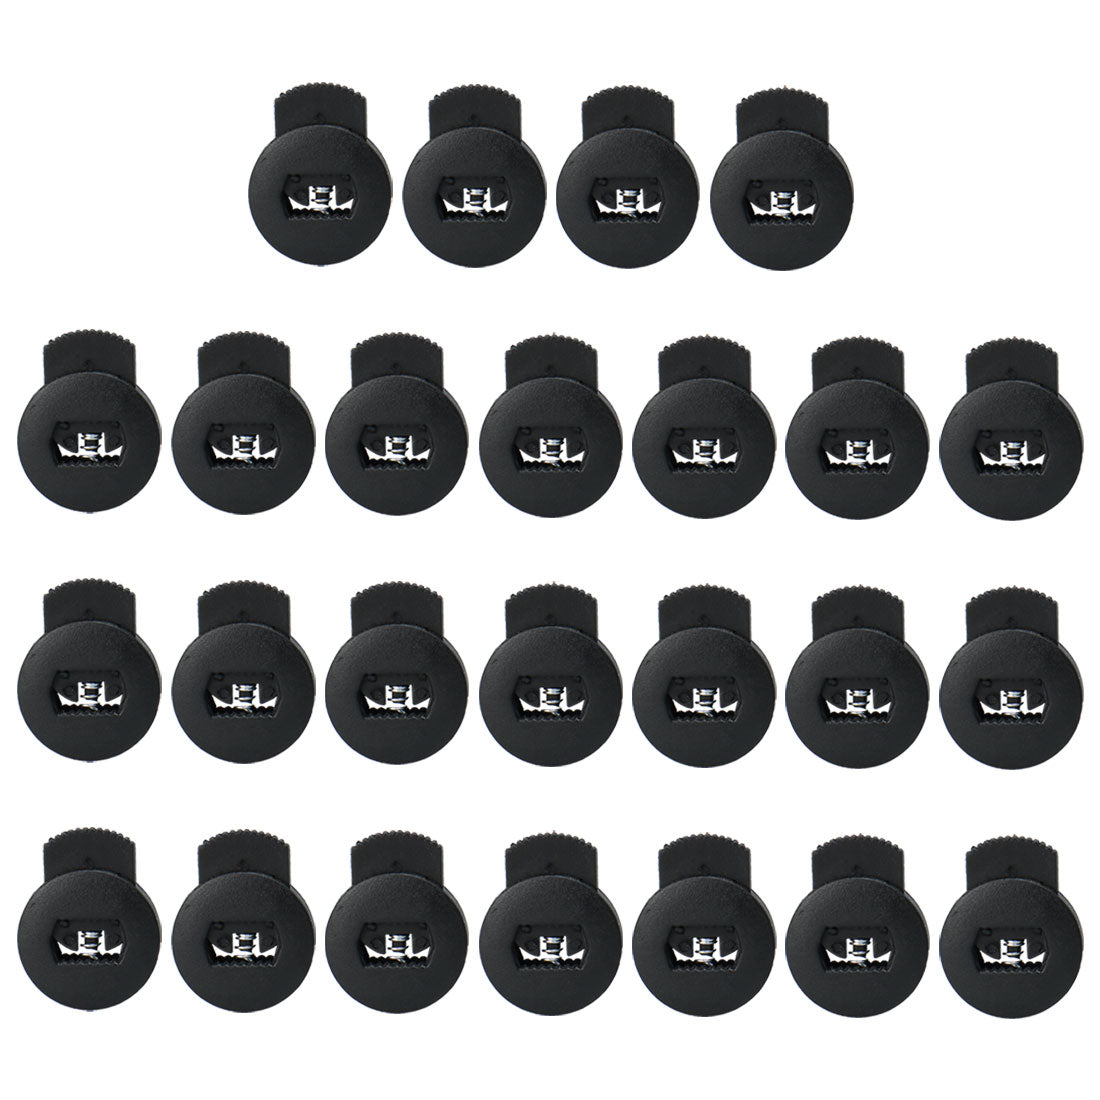 uxcell Uxcell 25pcs Plastic Cord Lock Stoppers Ends Spring Toggle Fastener Organizers, Black